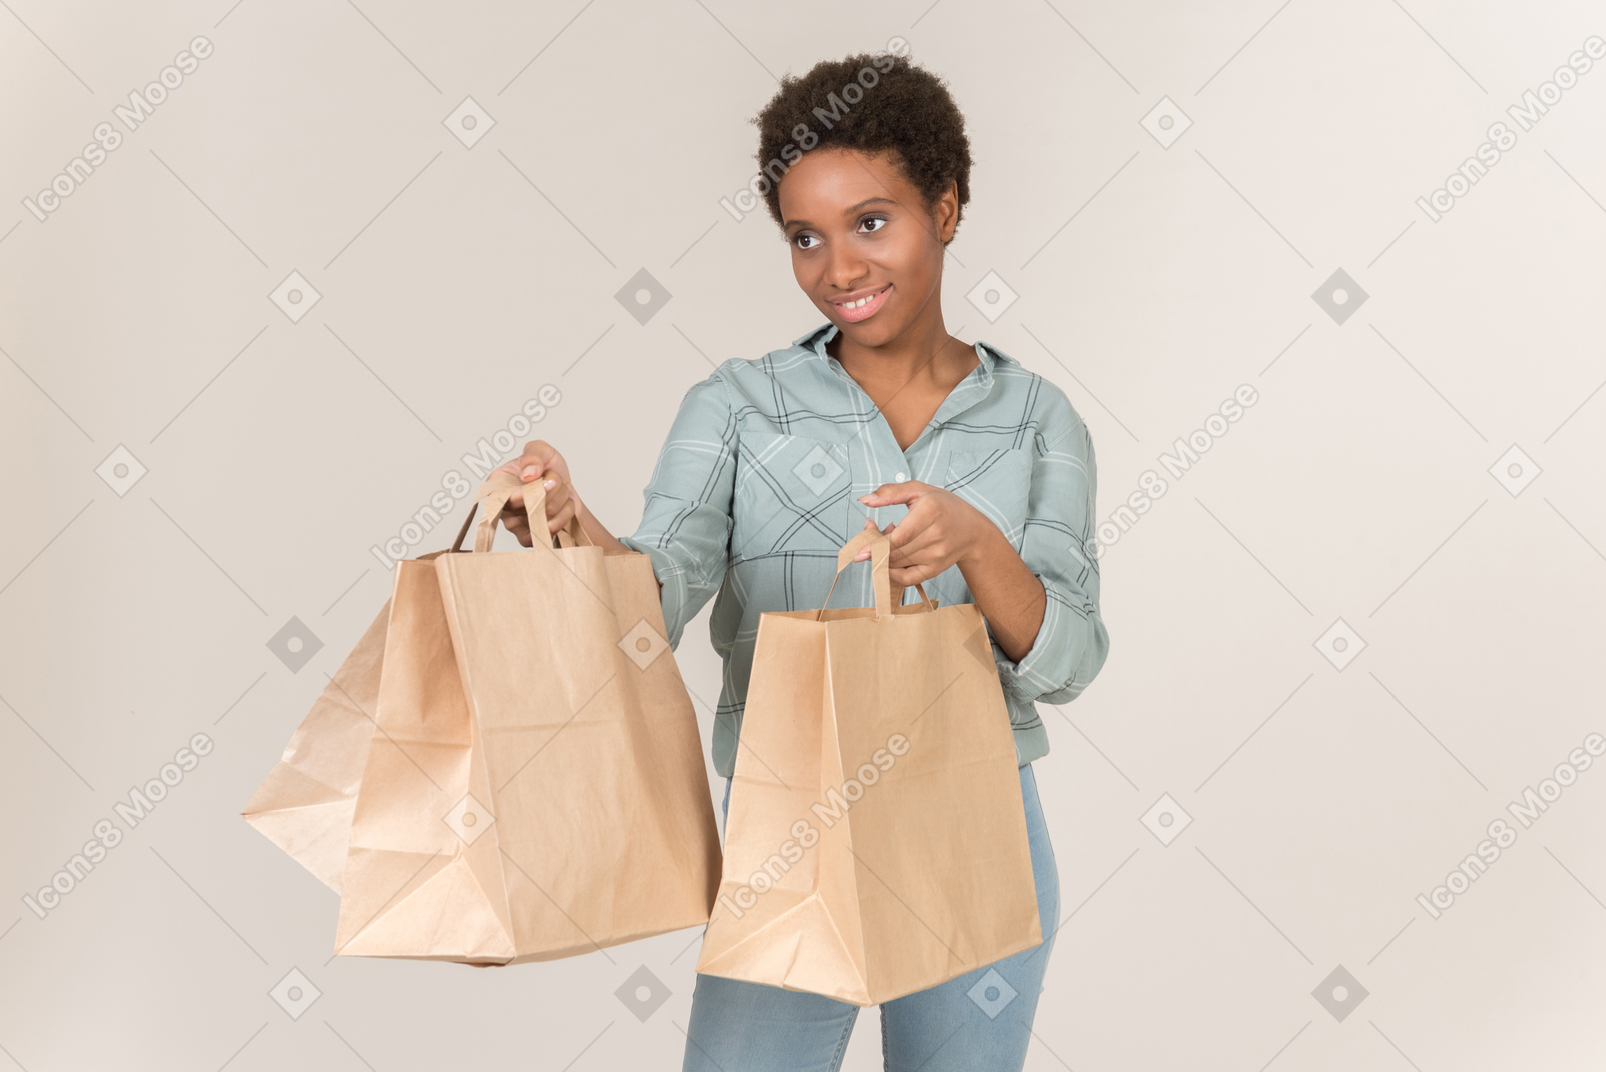 Smiling young afro woman holding paper bags